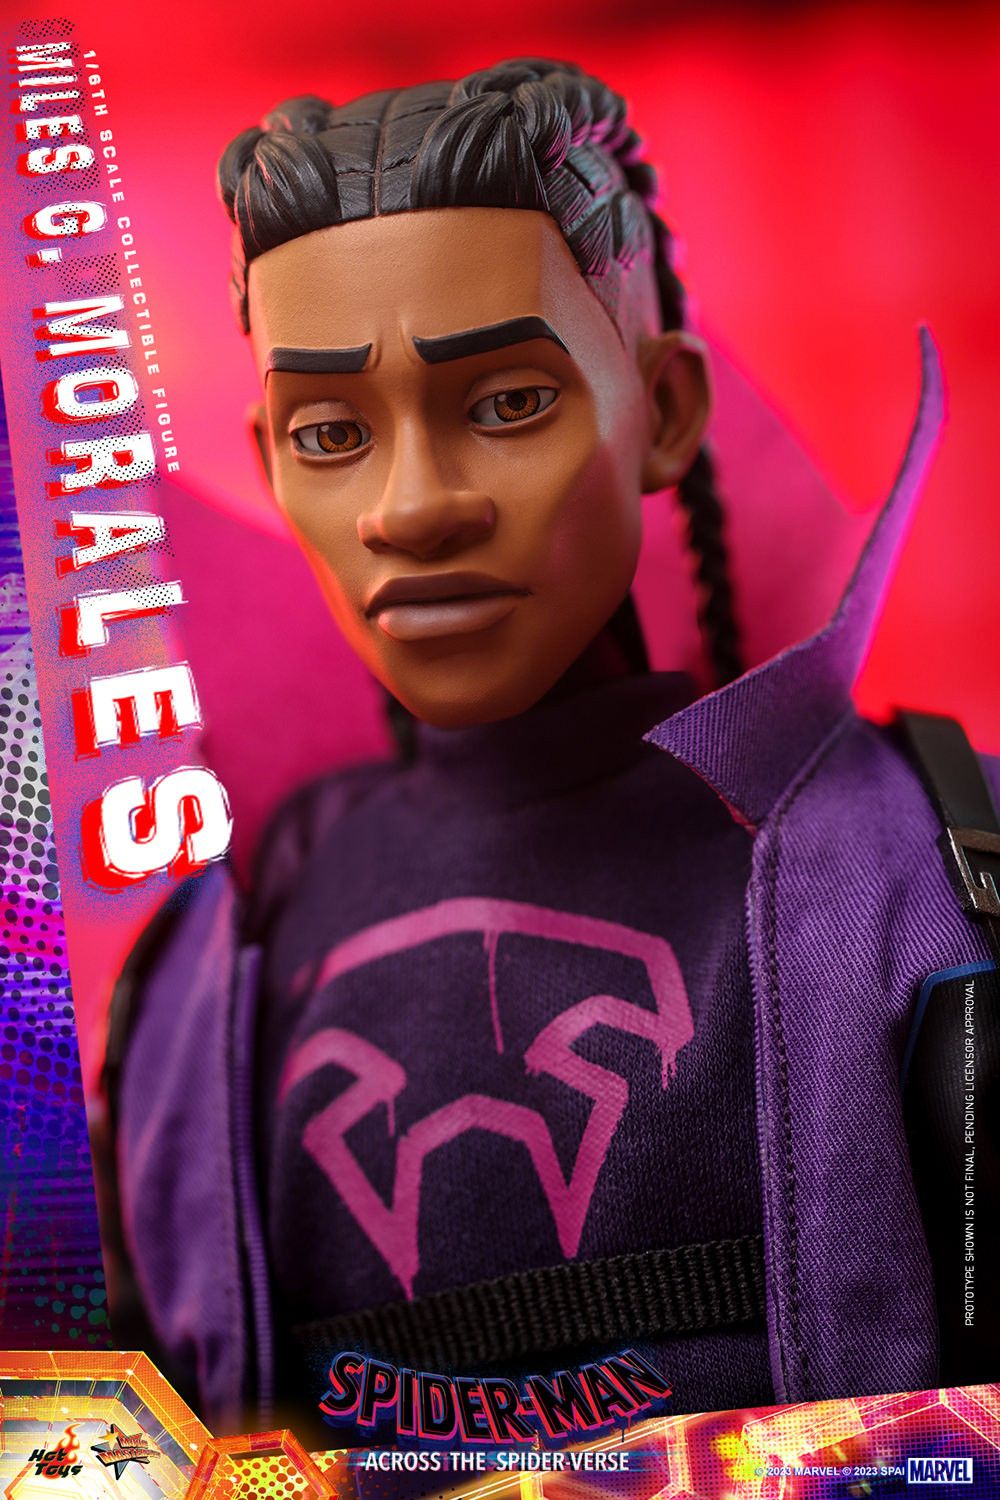 Miles G. Morales (Special Edition) Exclusive Edition (Prototype Shown) View 19